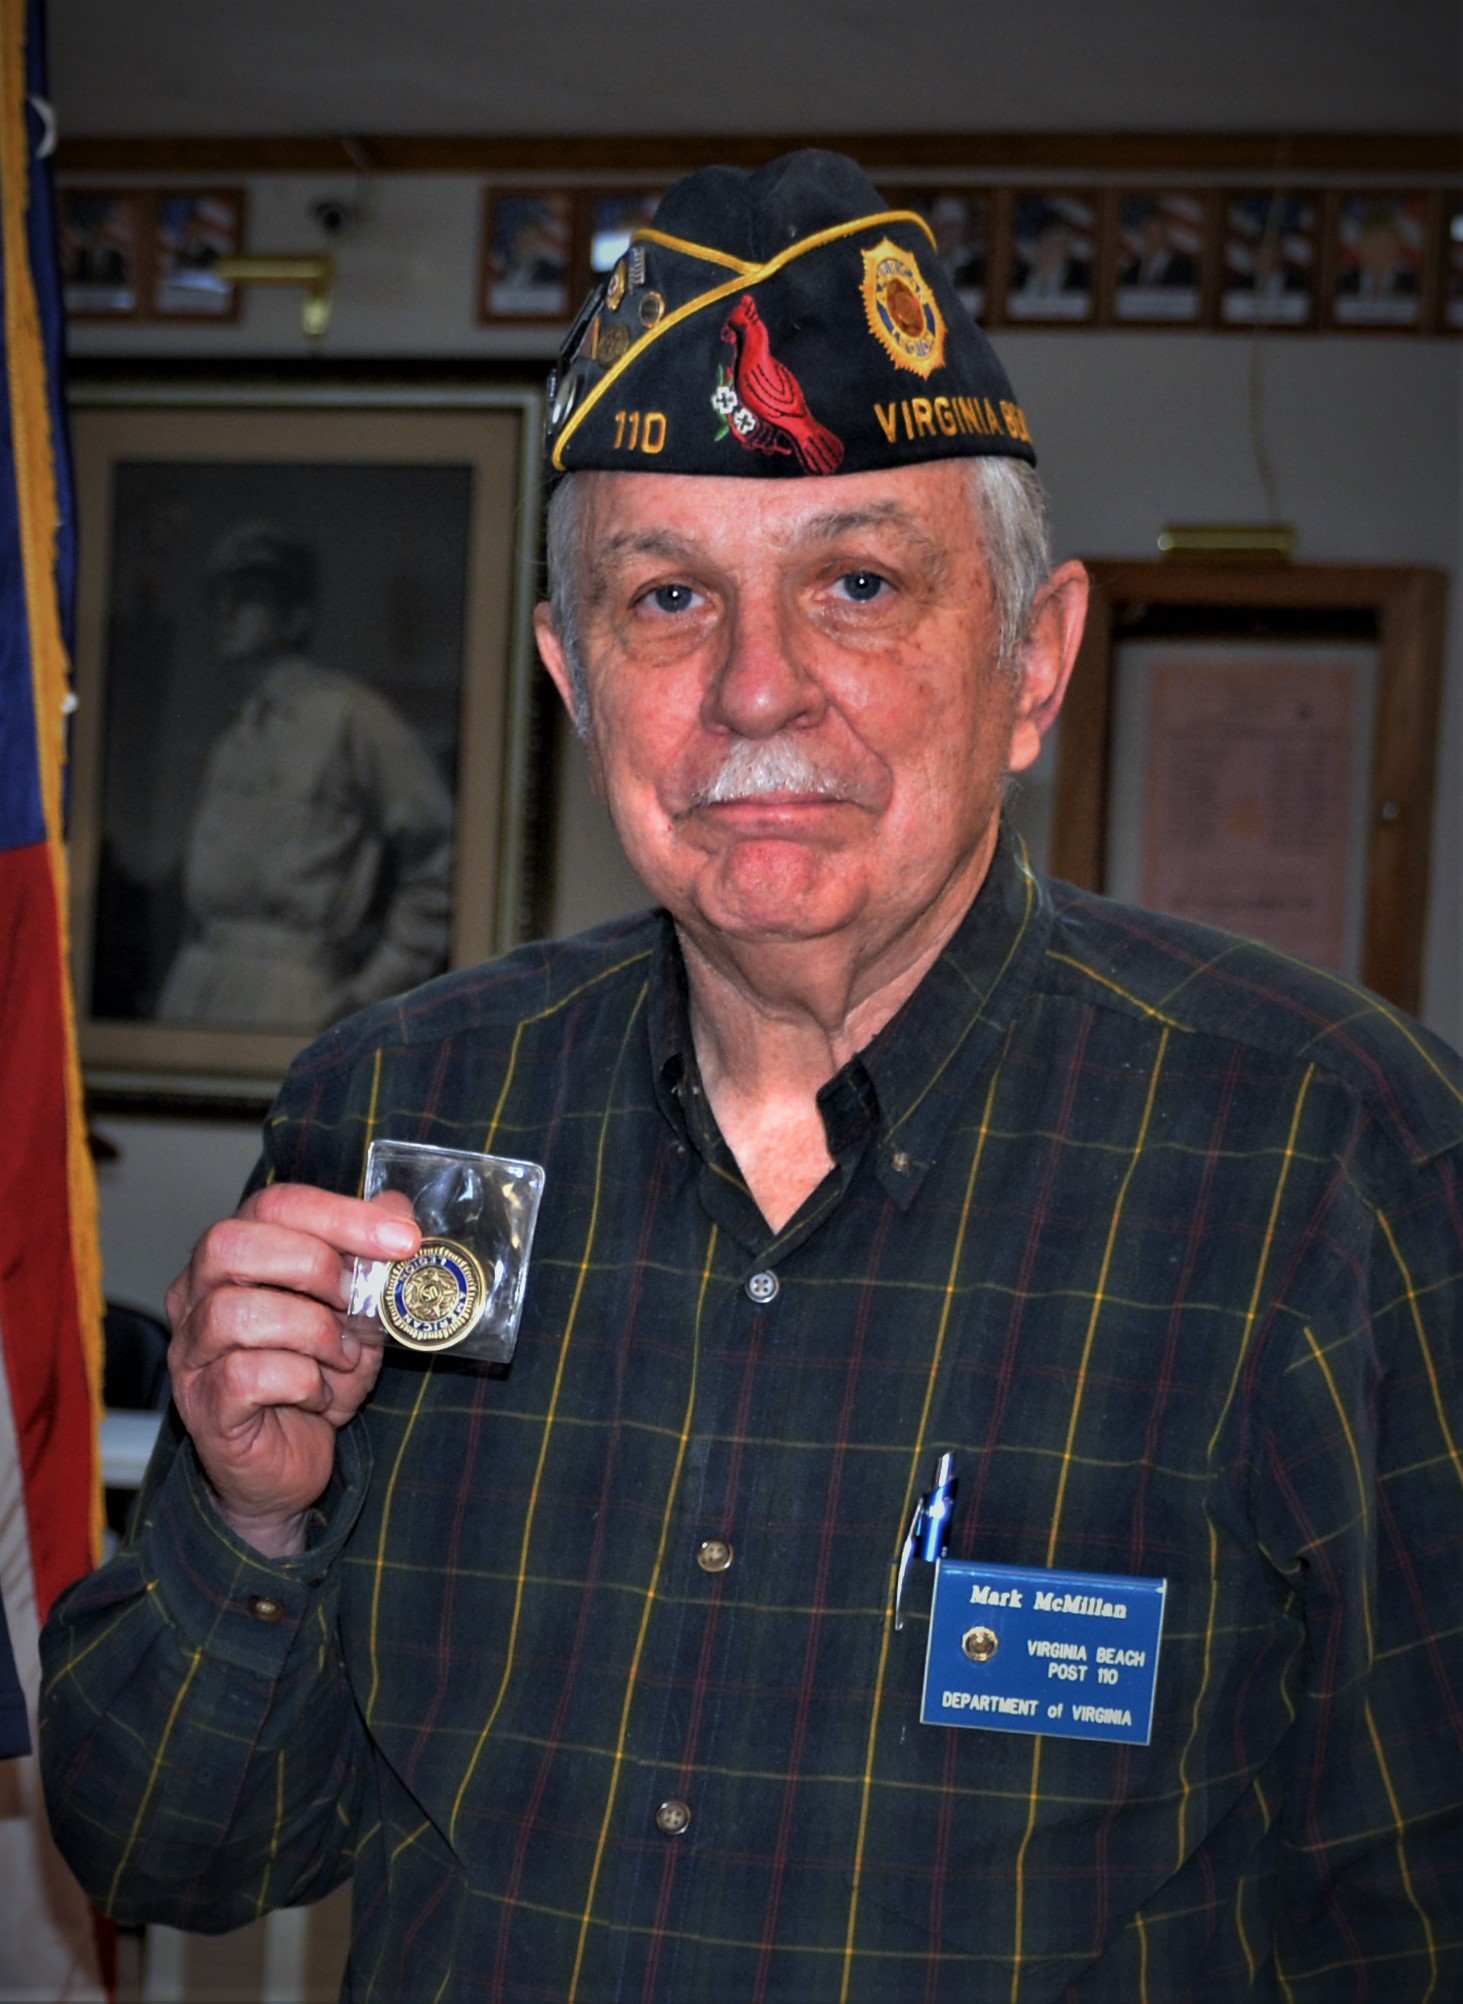 Legionnaire Mark McMillan was recognized for                              his 25 years of membership and service to the                              American Legion at the November 25, 2020 meeting                              of American Legion Post 110 in Virginia Beach,                              VA. Post Commander Rick Jones presented McMillan                              with an American Legion Commemorative Coin.                              McMillan served as Post 110 Commander during                              2006-2007. (Photography by Bert Wendell, Jr.)